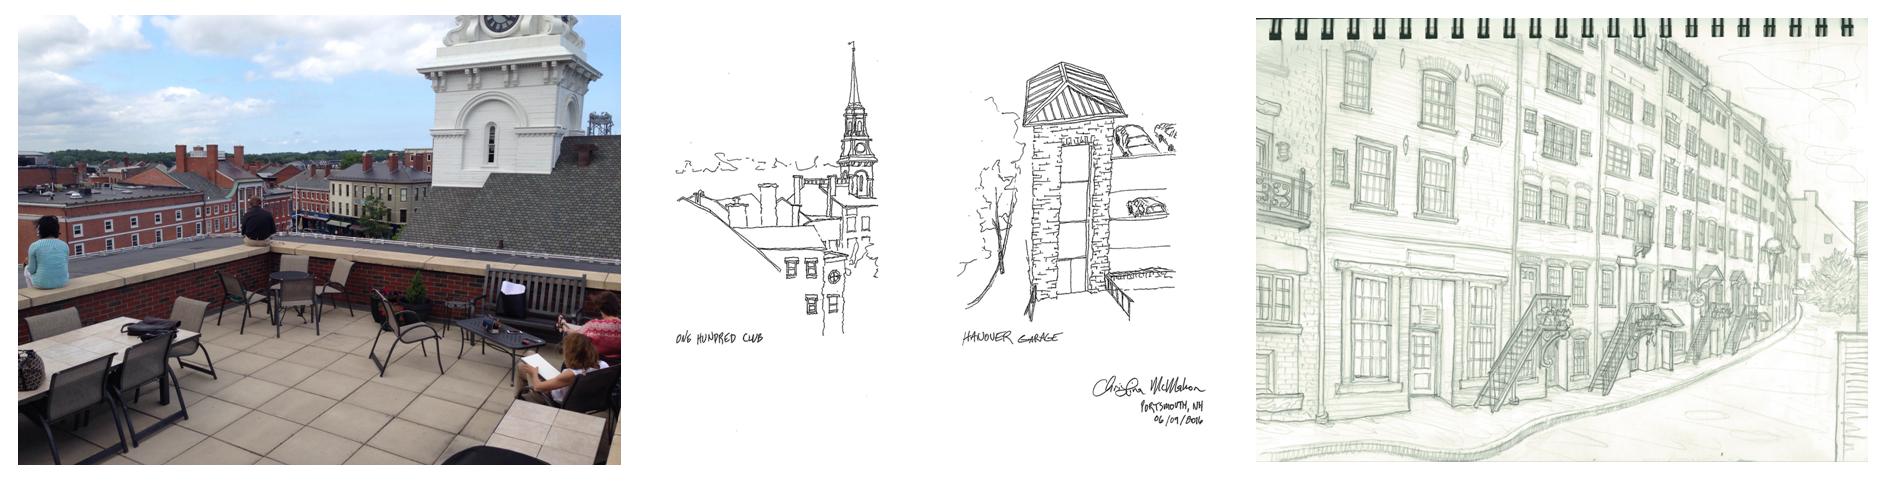 A collage of images showing an exterior photo of a building and two hand-drawn architectural line sketches.